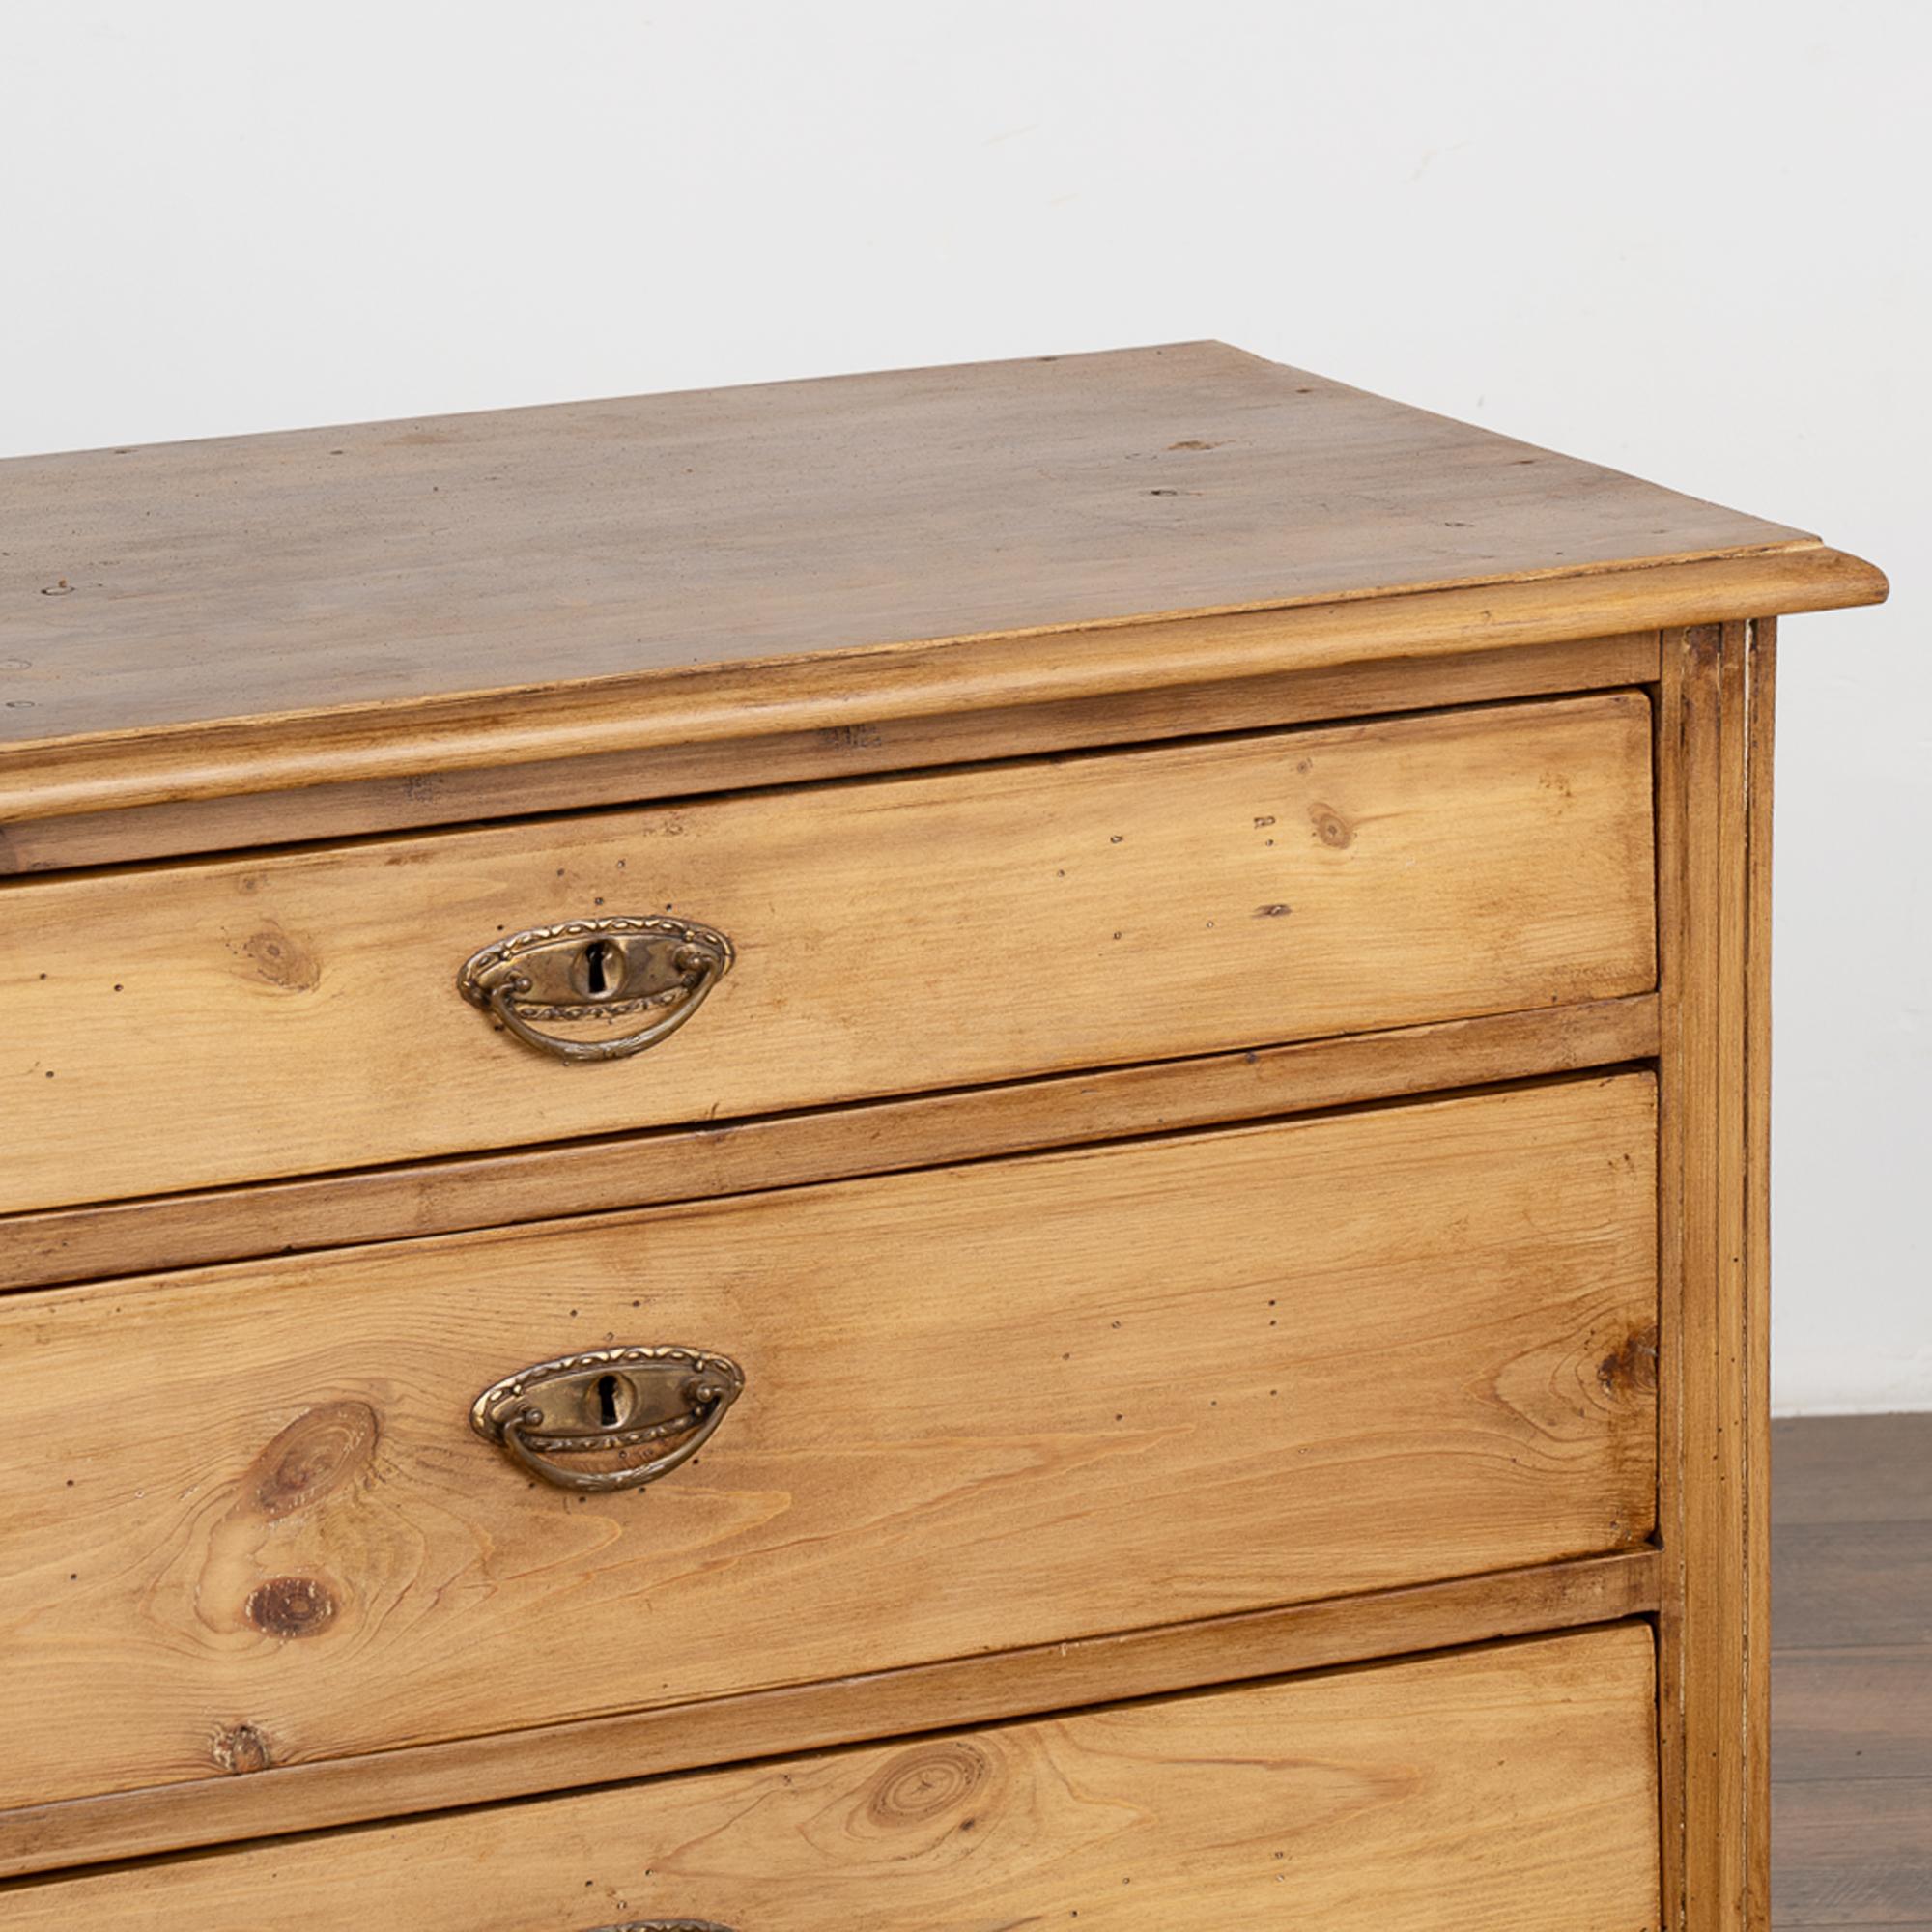 Country Small Pine Chest of Three Drawers, Denmark circa 1890-1900